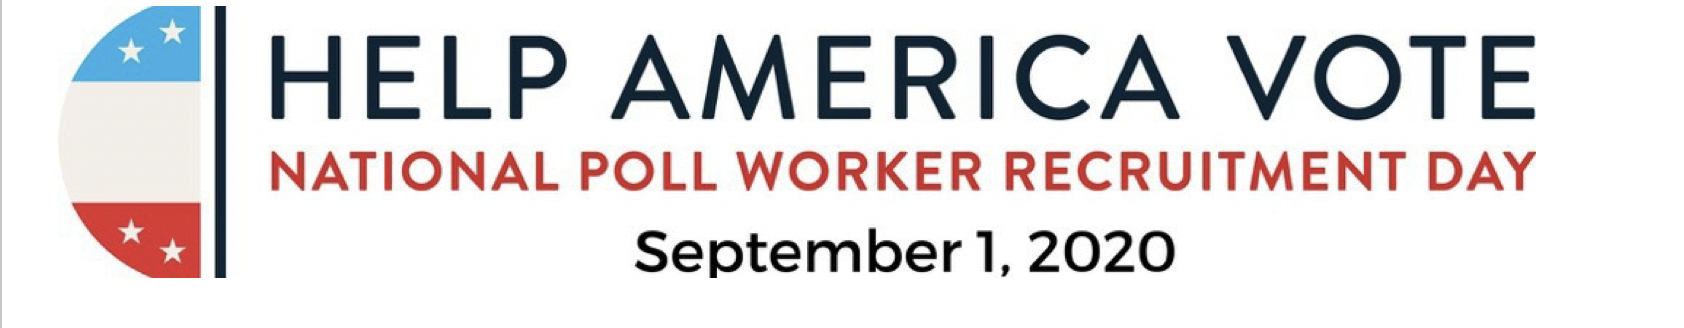 Help America Vote National Poll Worker Recruitment Day September 1, 2020